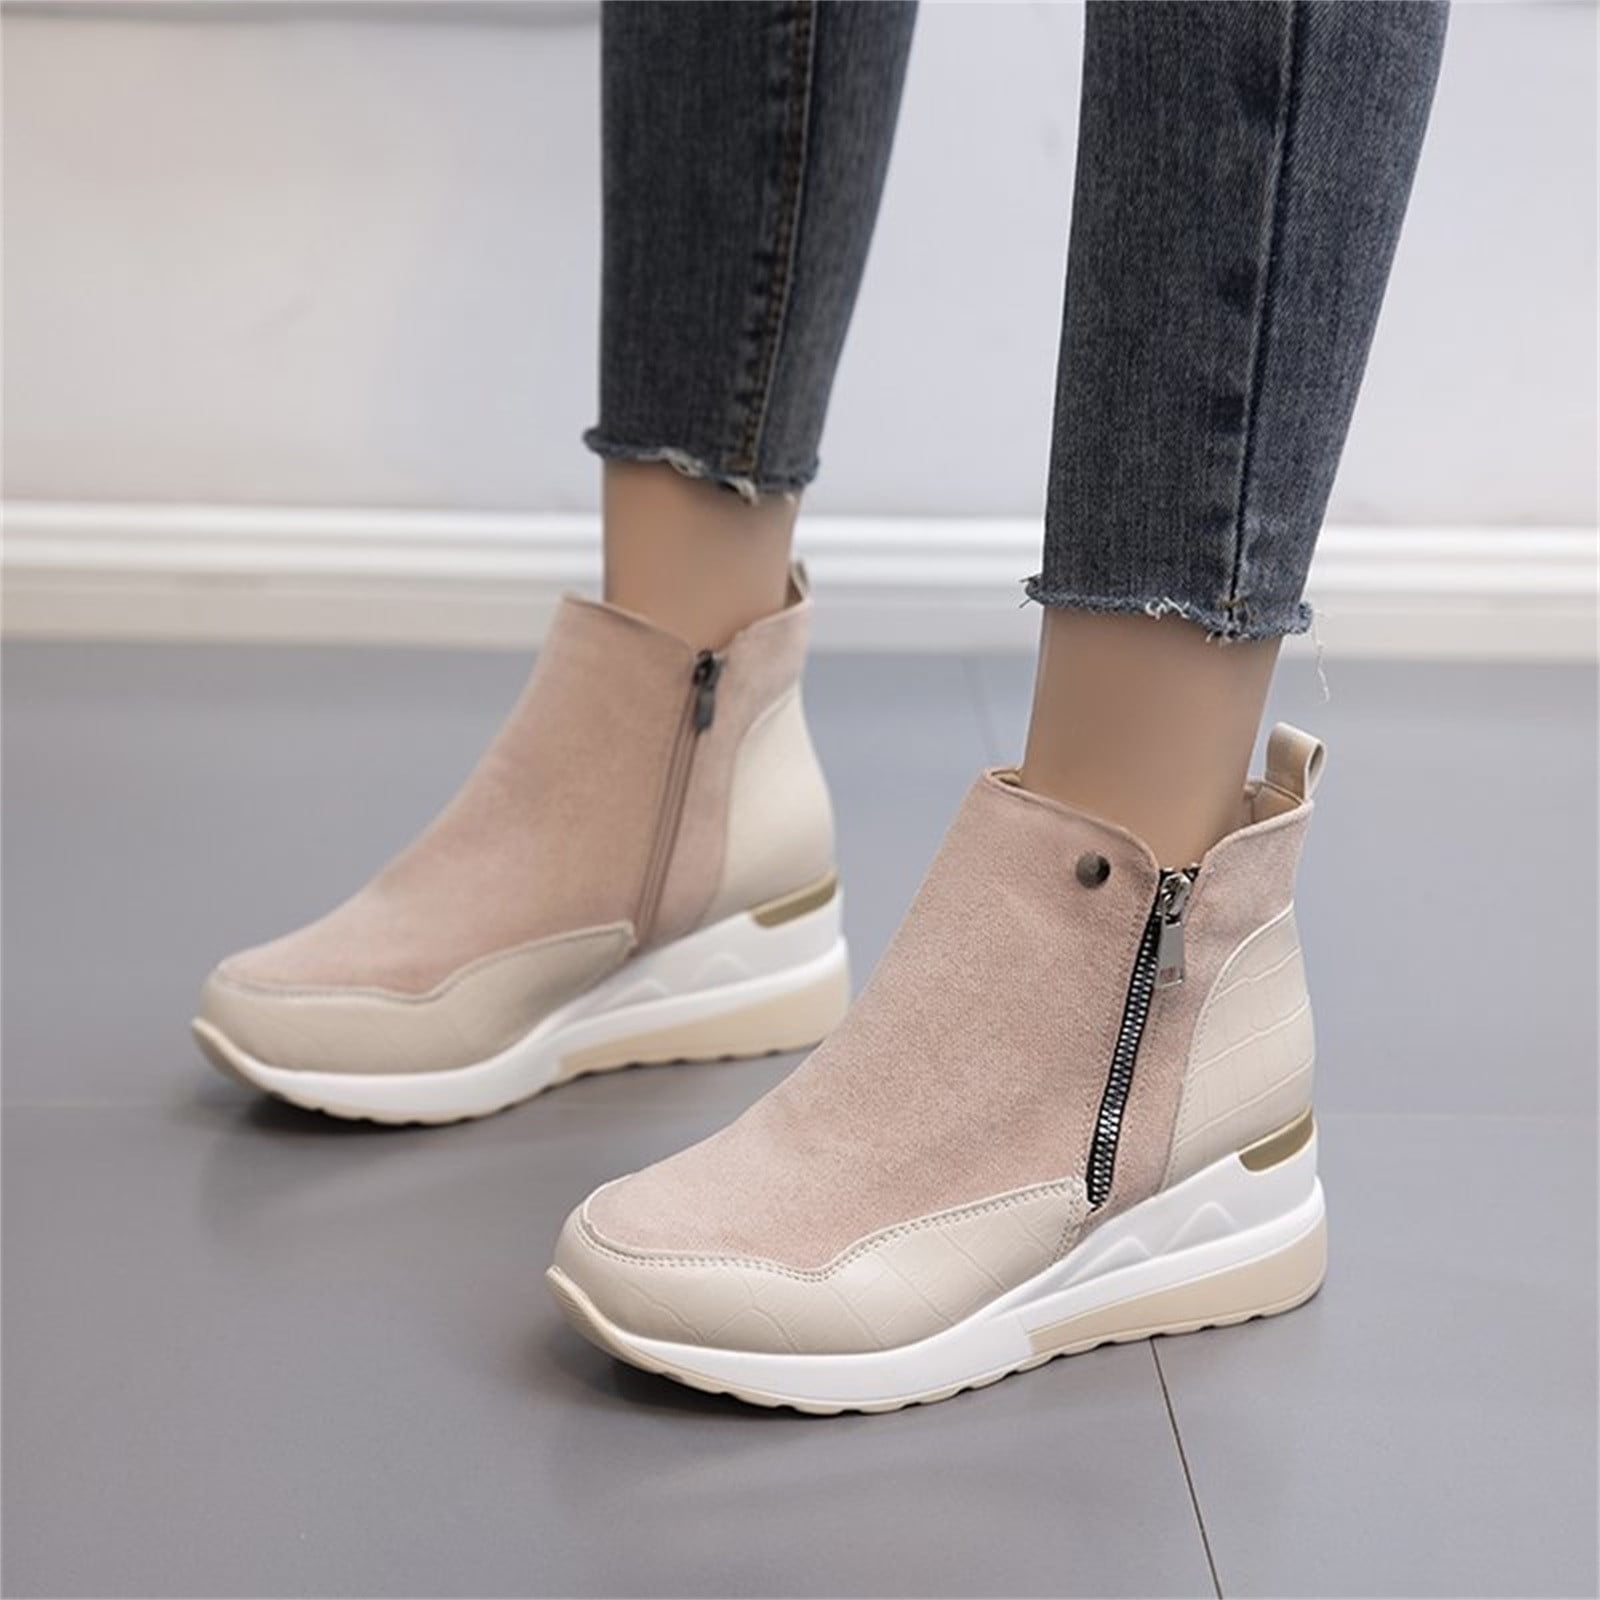 Ladies Platform High Heel Wedge Side Zip Ankle Boots Faux Suede Party Shoes Uk